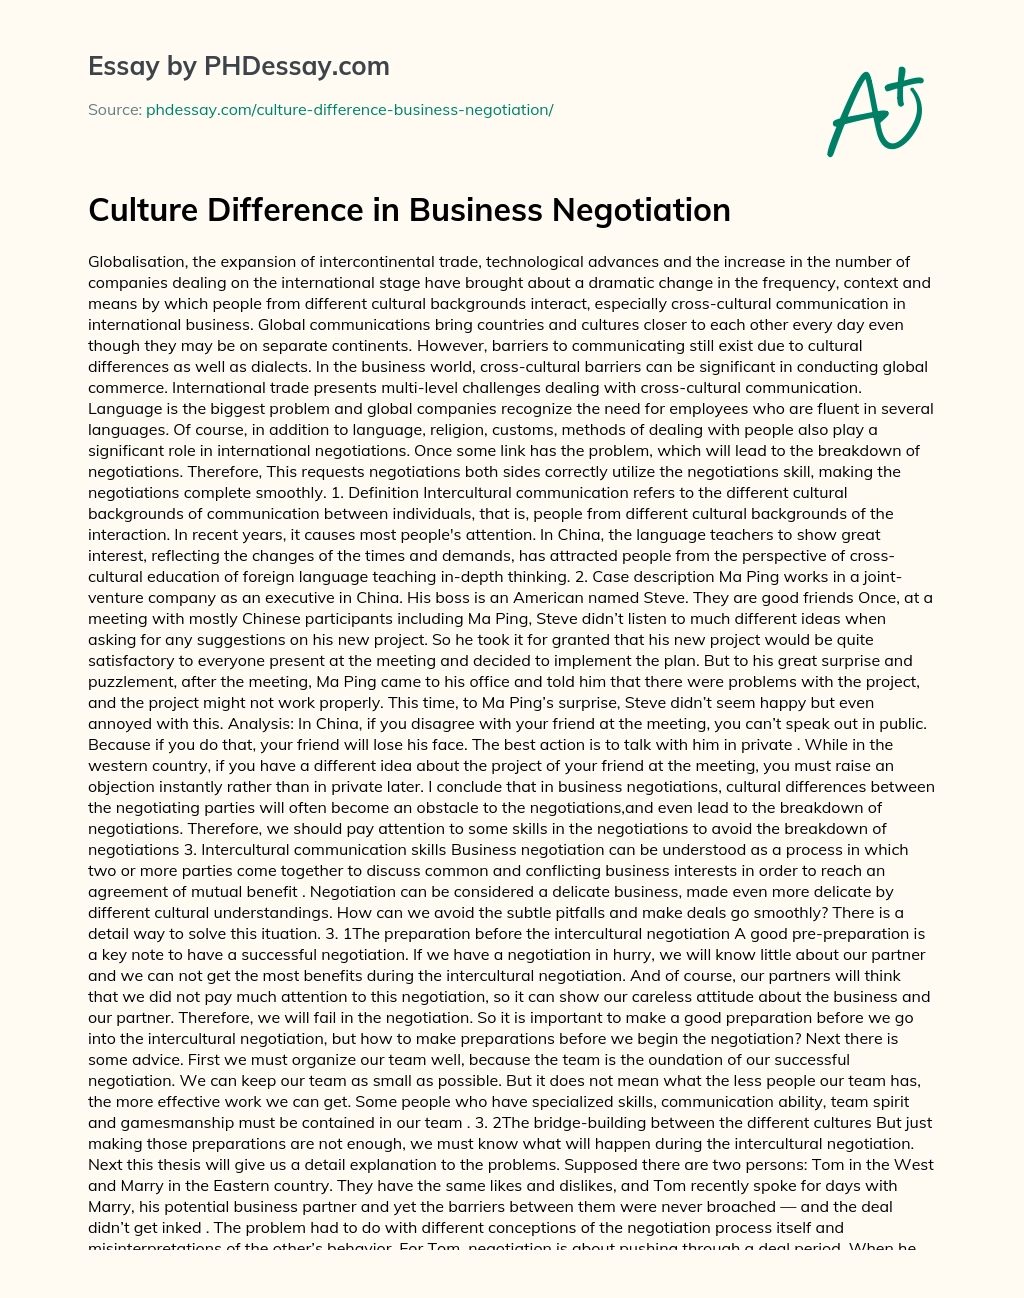 Culture Difference in Business Negotiation essay